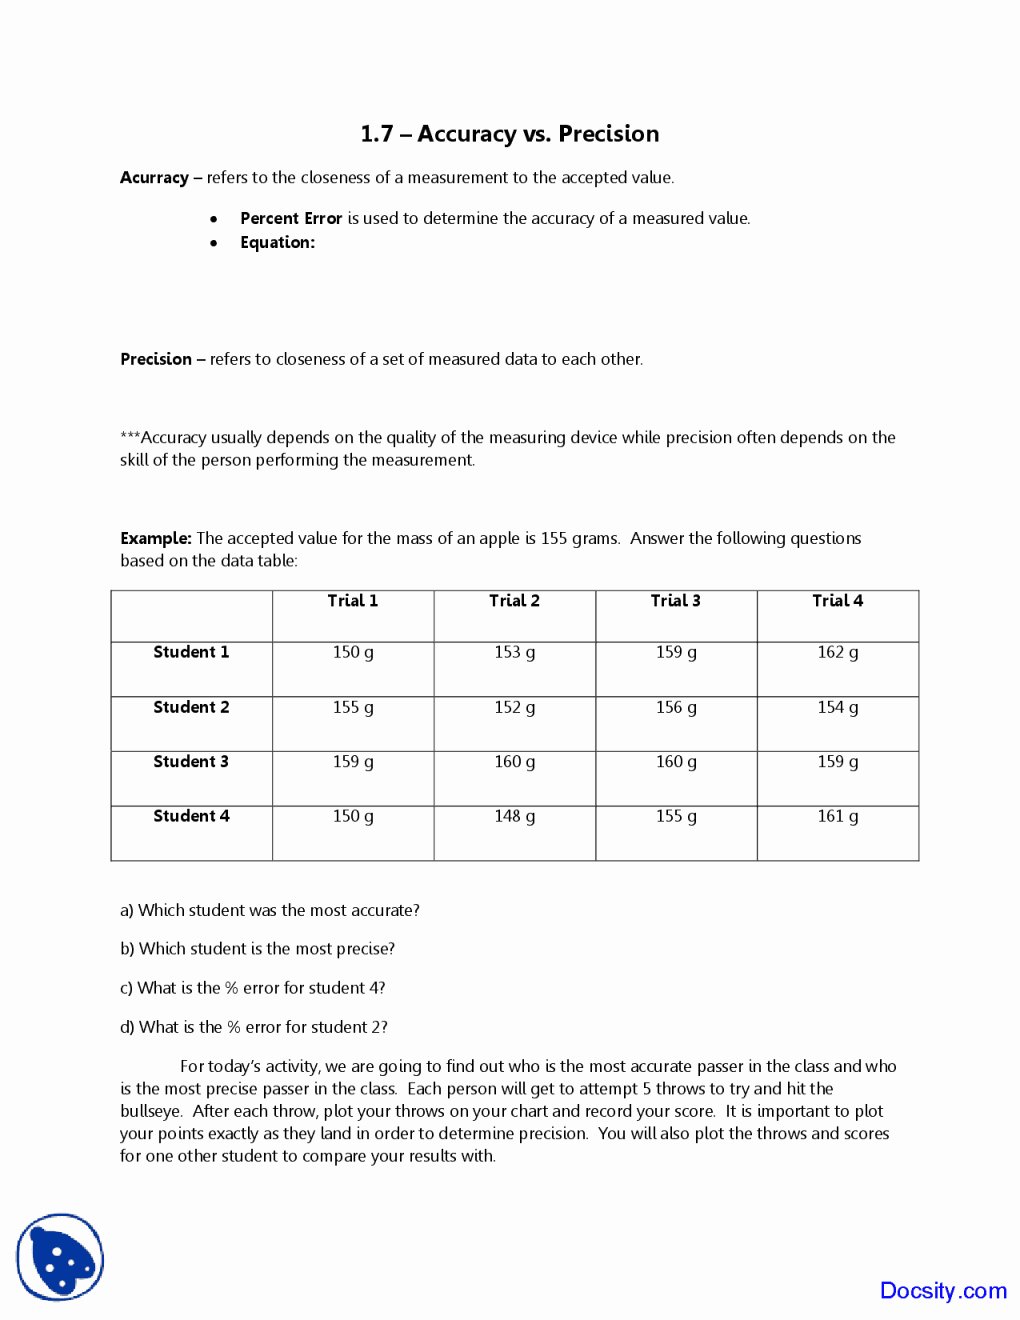 Accuracy and Precision Worksheet Luxury Accuracy and Precision Worksheet Answers